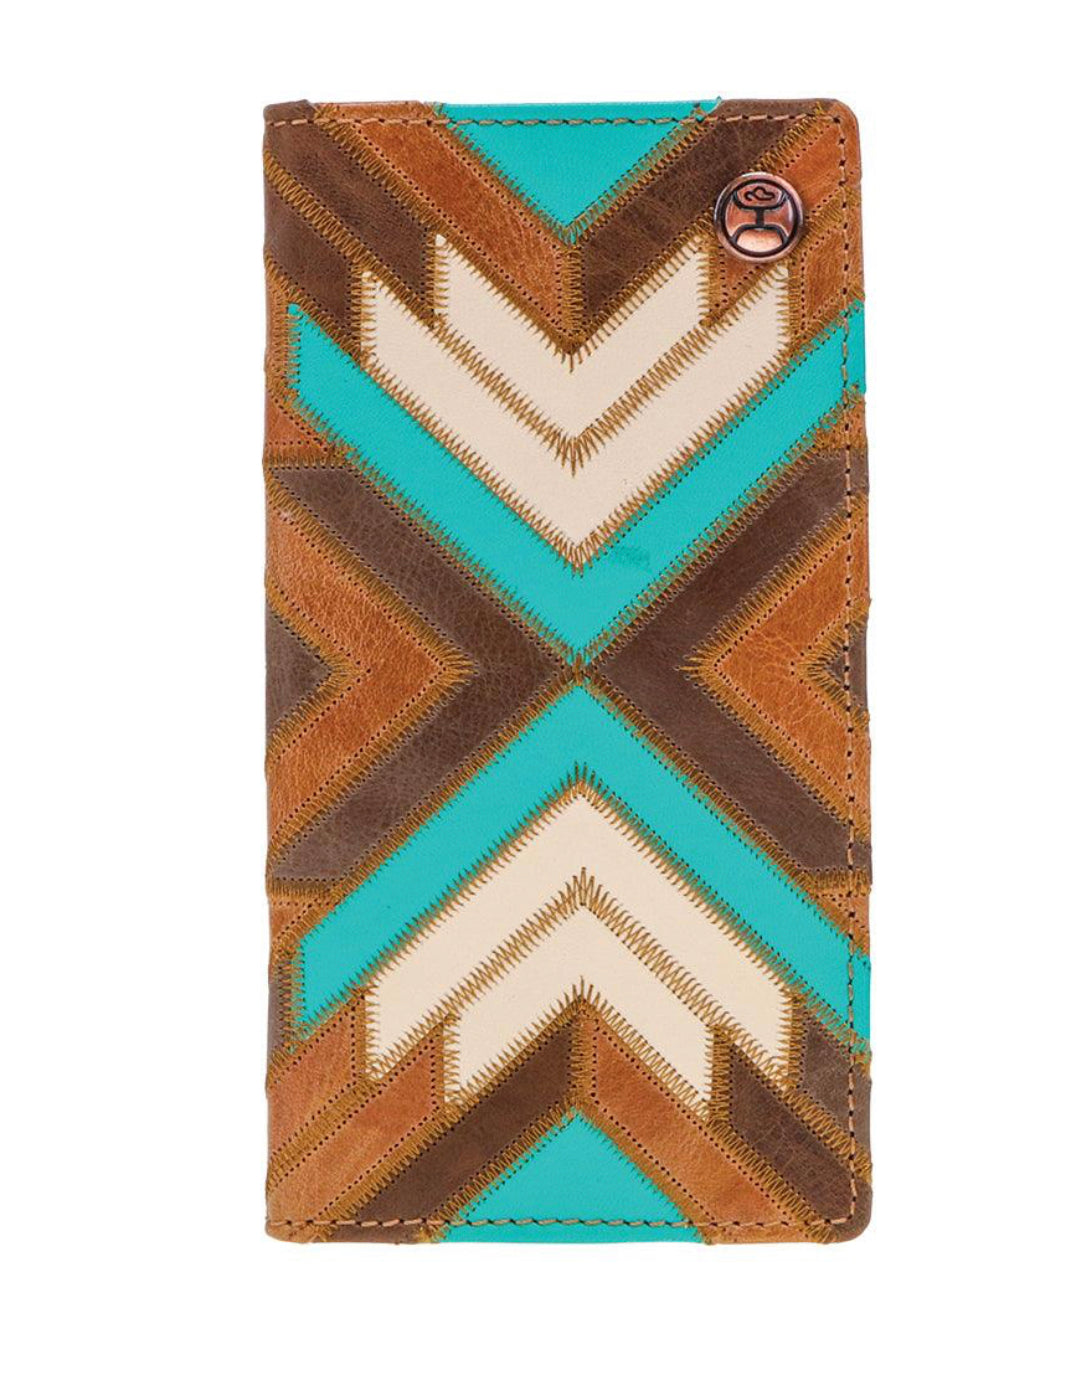 HOOEY “MONTEZUMA” PATCHWORK RODEO WALLET WITH ACCENTS AND HOOEY LOGO RIVET